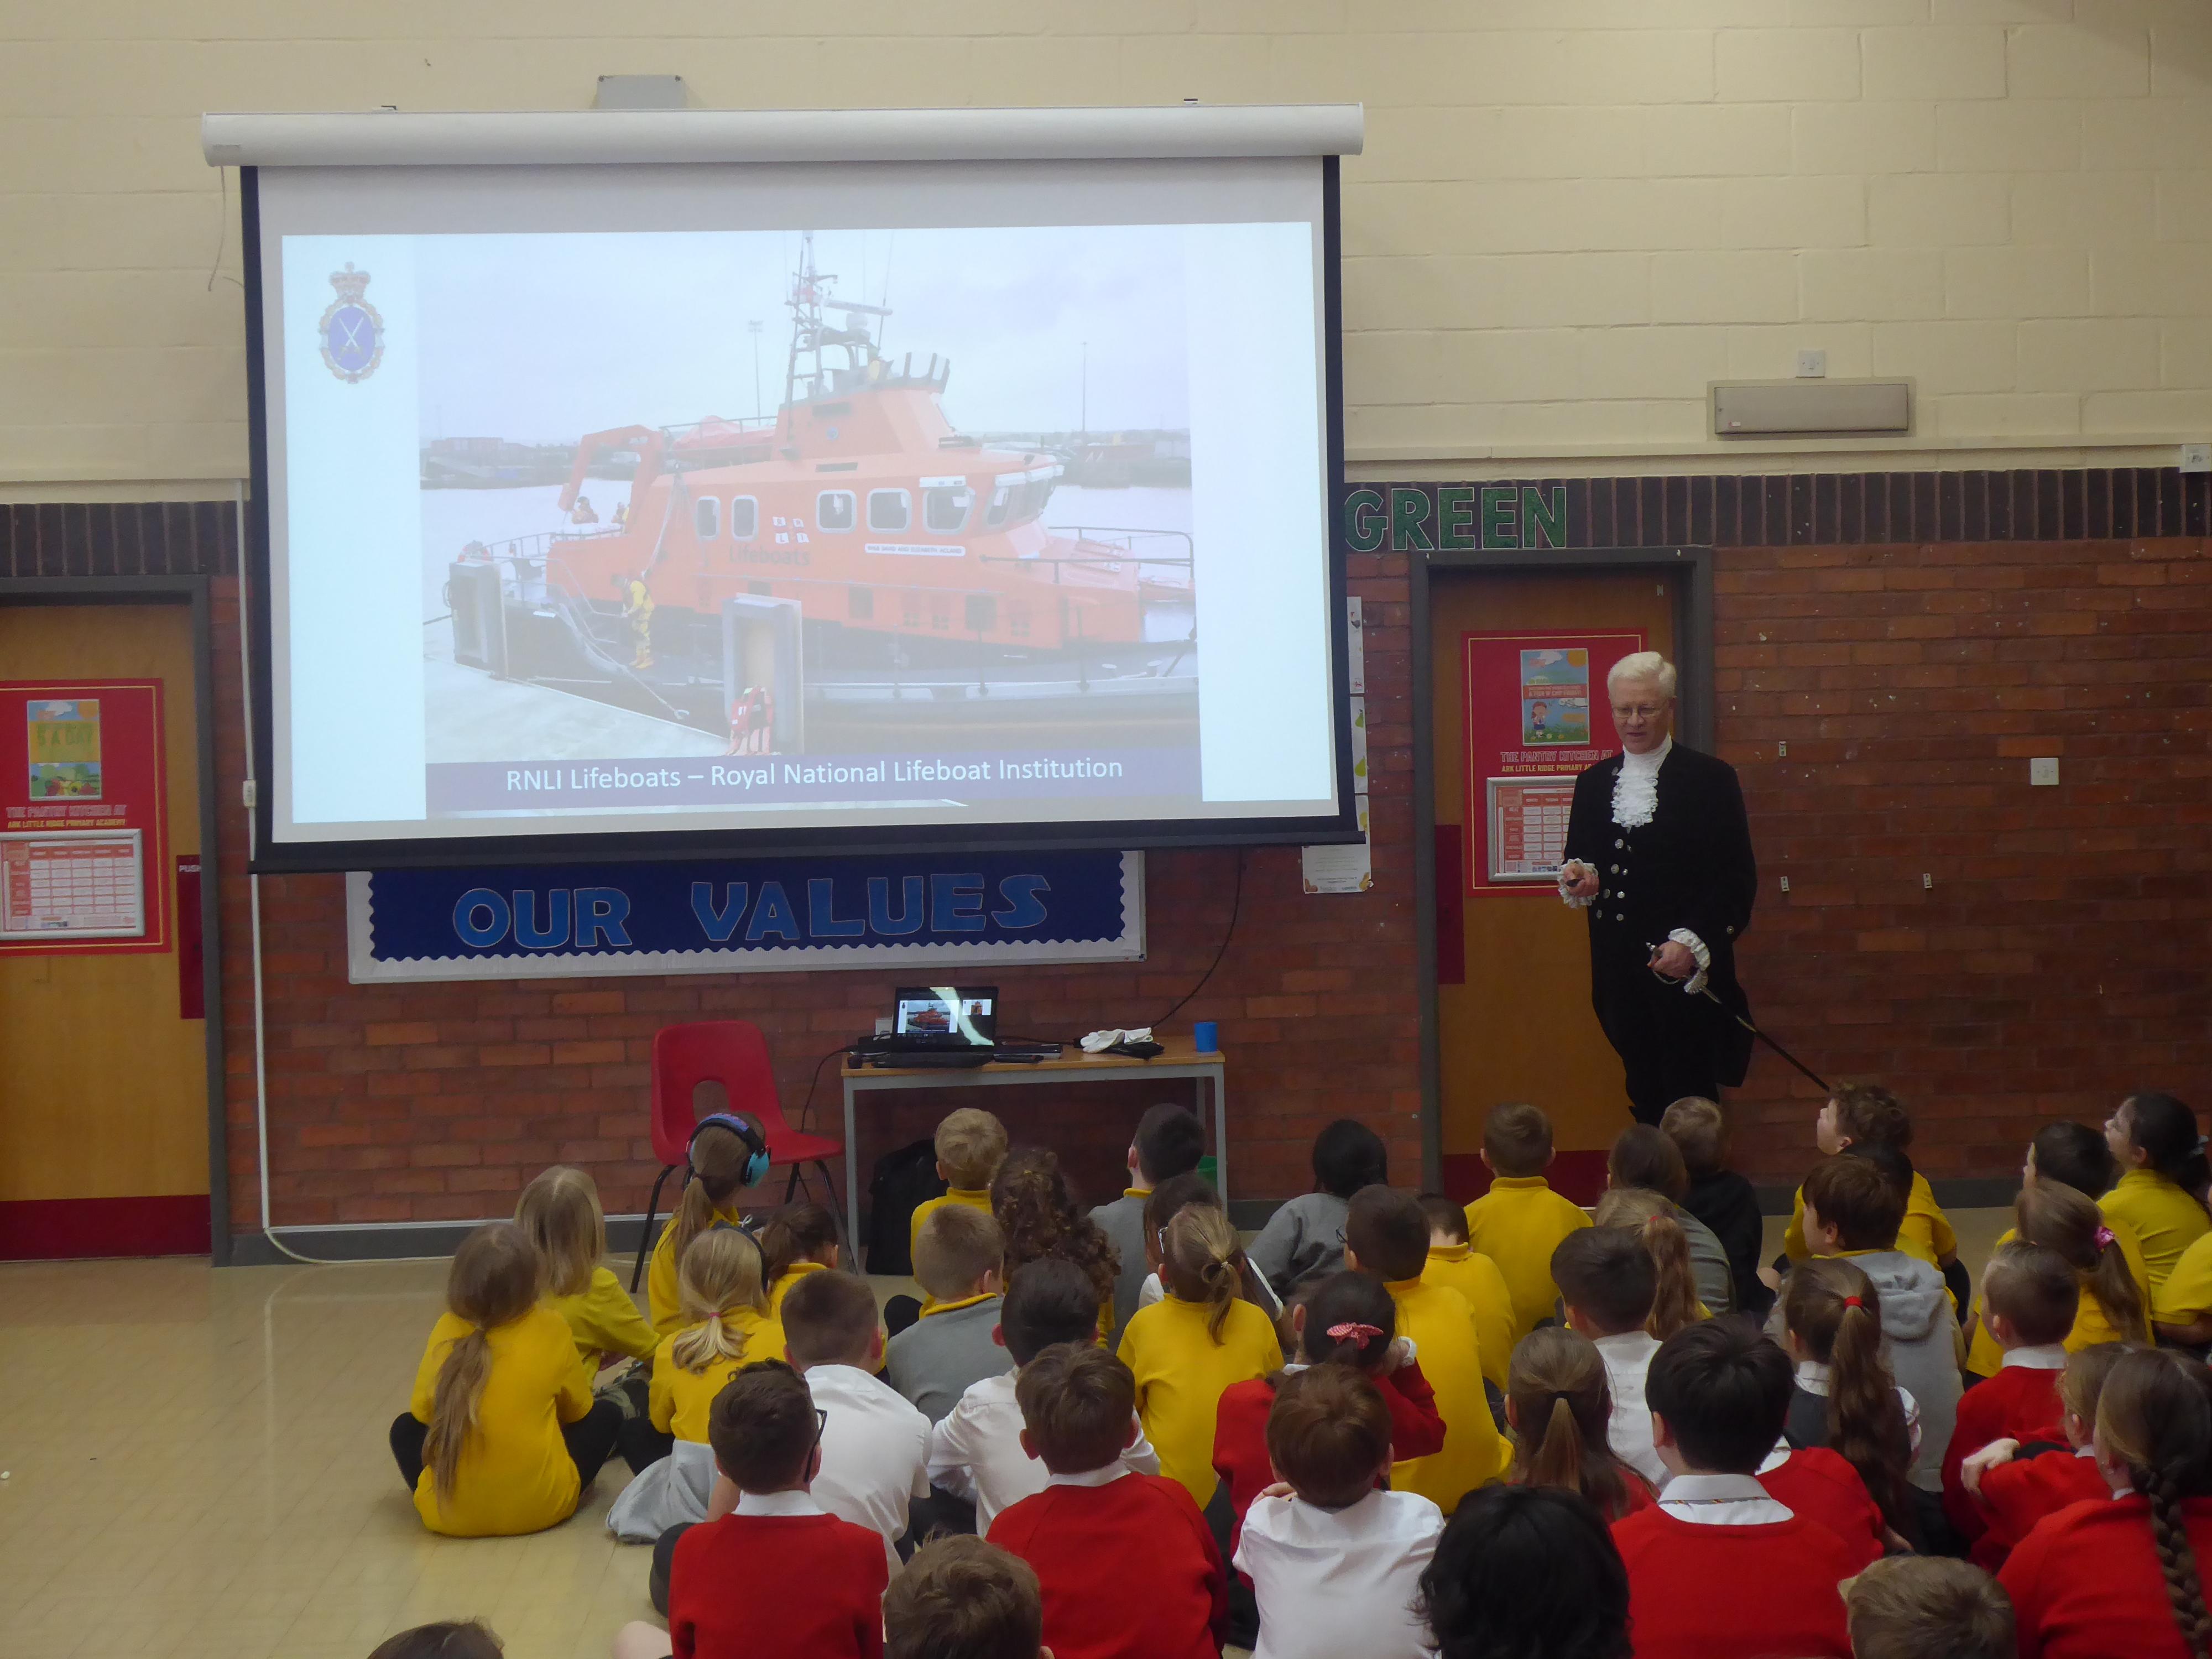 A Visit from The High Sheriff of East Sussex